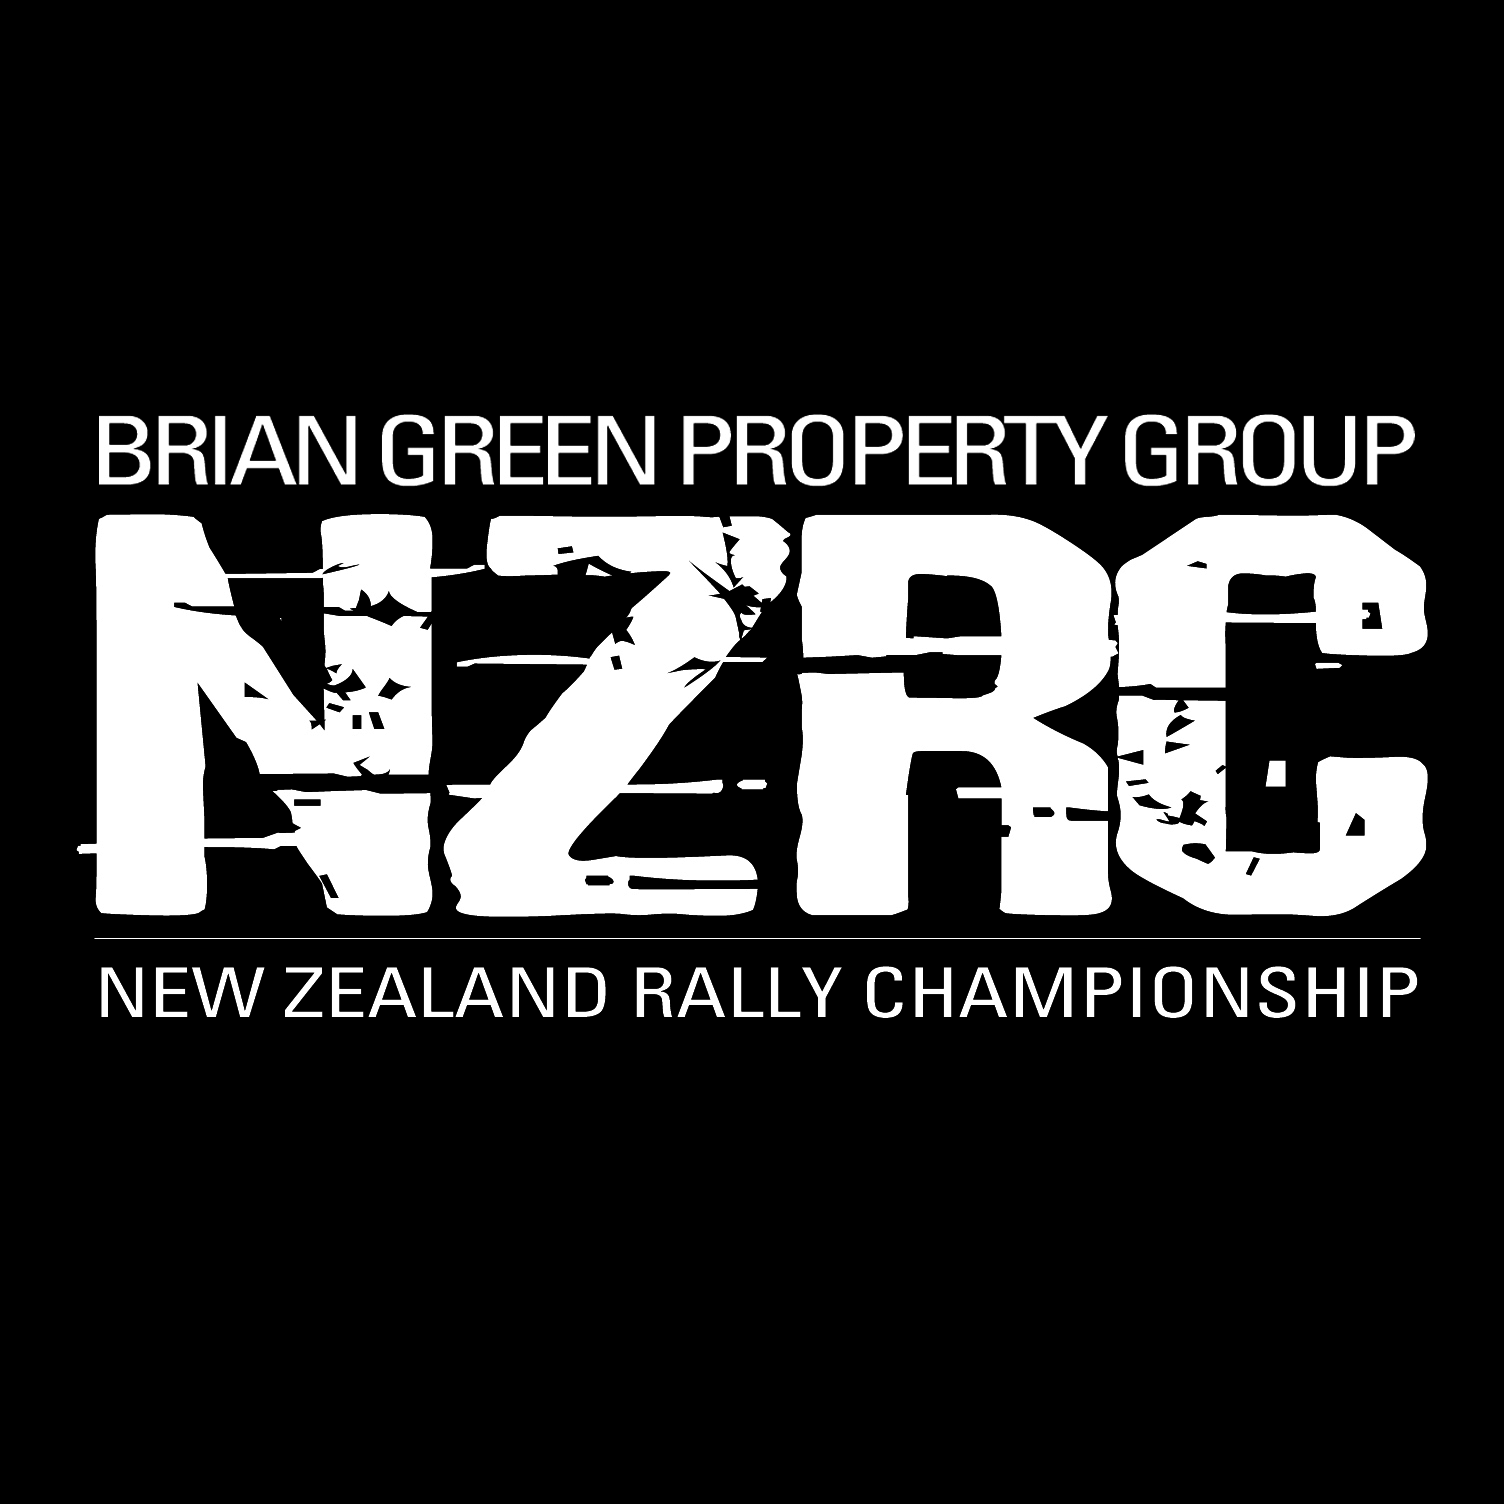 Hunt the champion and maiden victory for Summerfield | :: Brian Green Property Group New Zealand Rally Championship ::